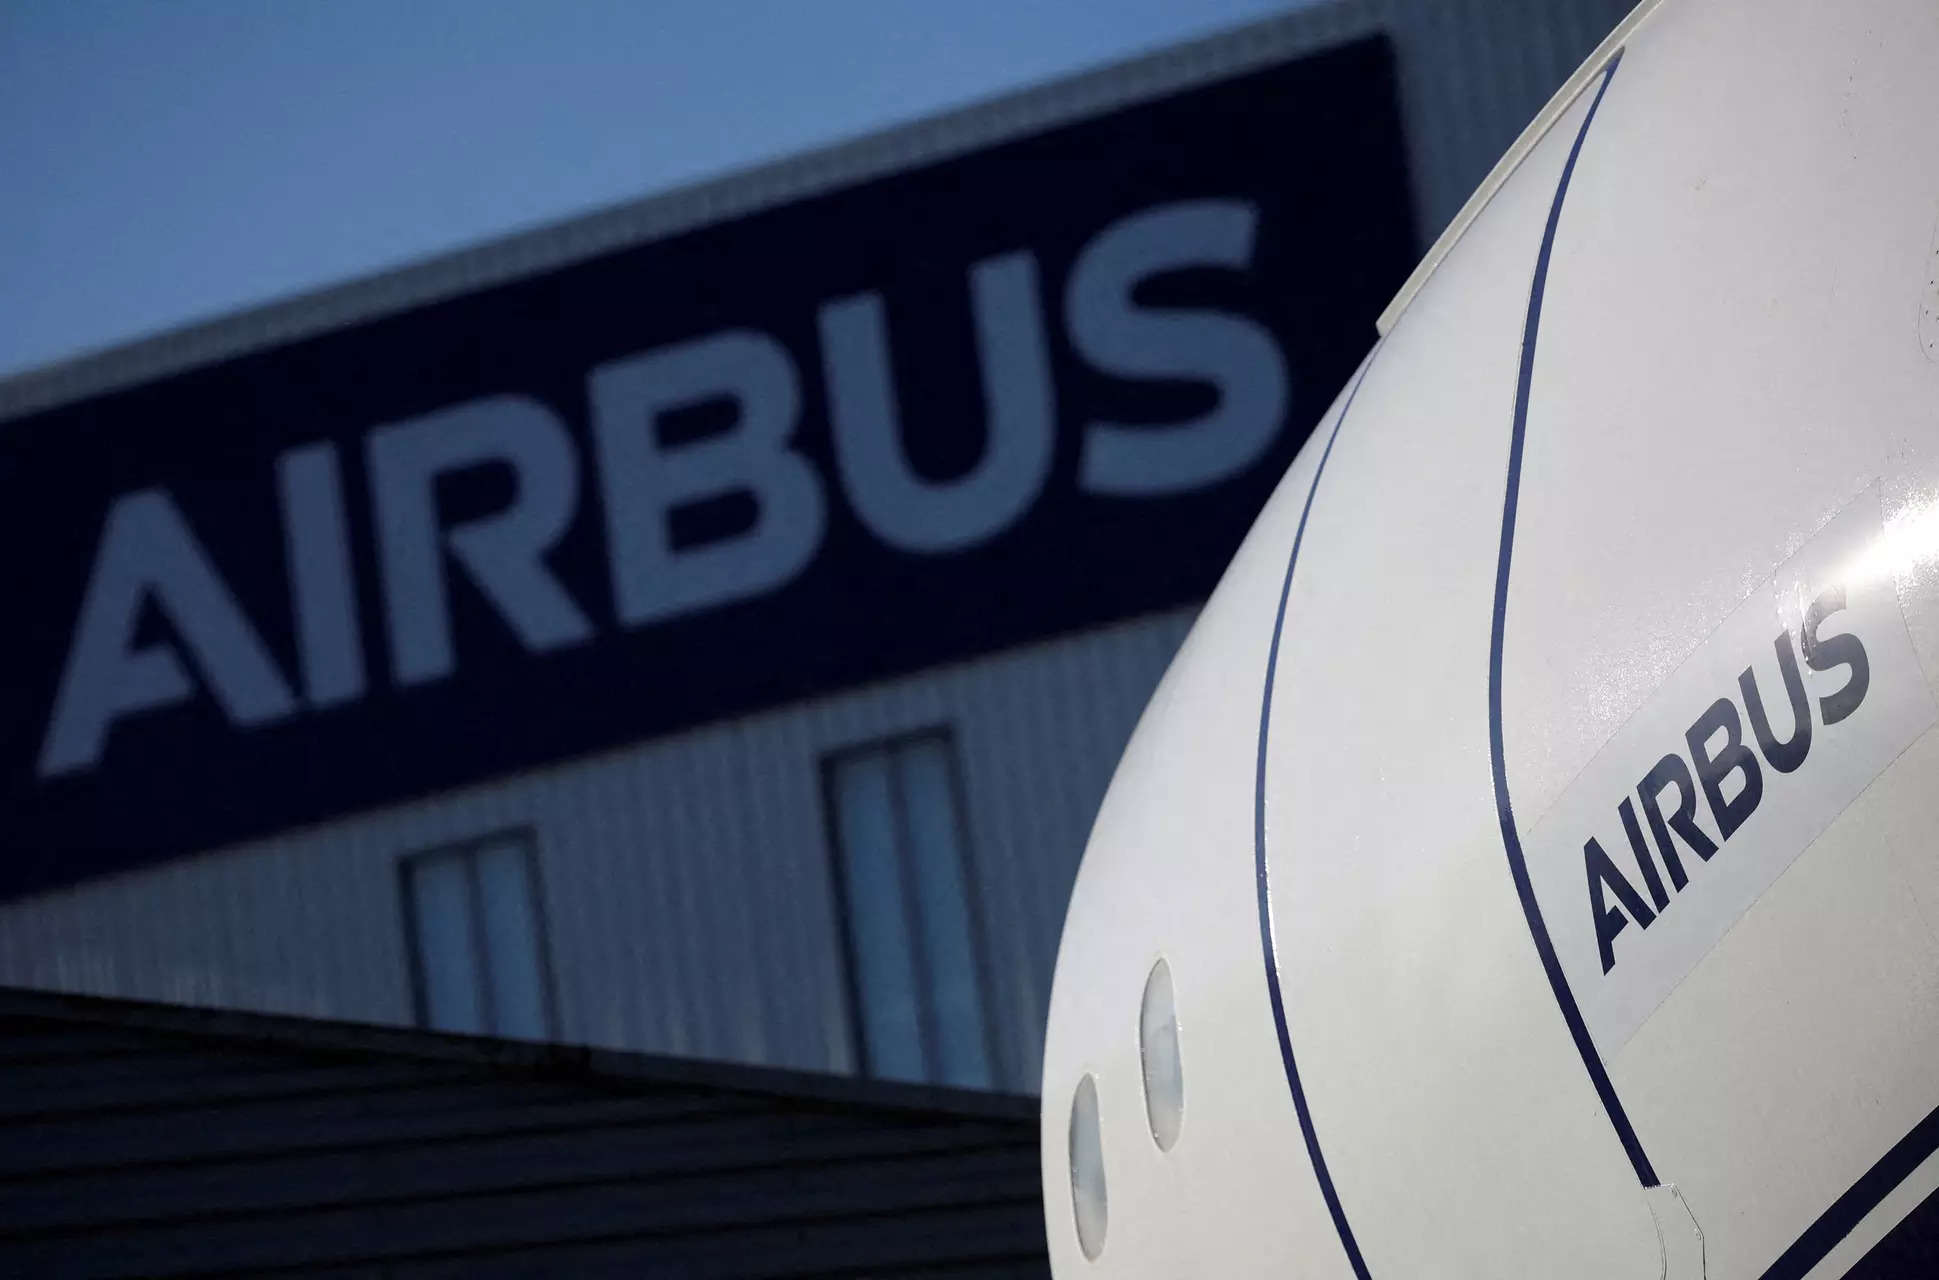 airbus is humble despite boeing's struggles